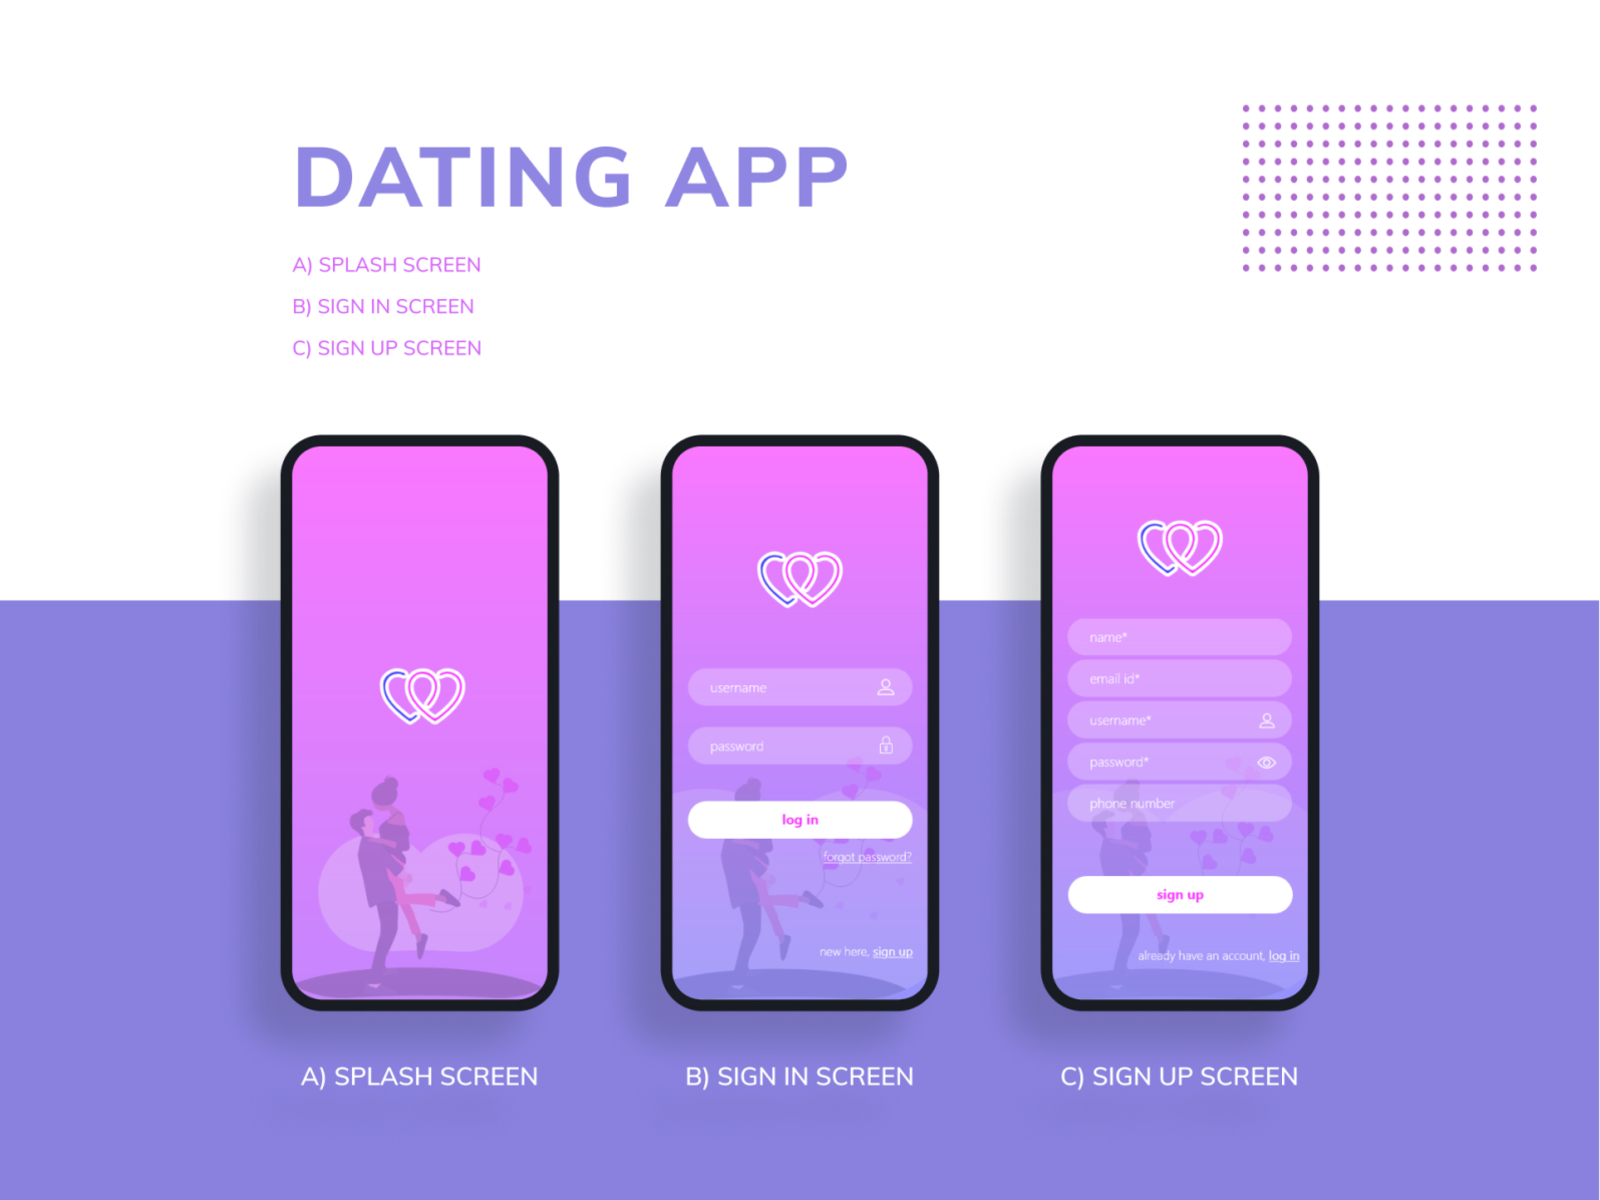 hould i sign up for a dating app